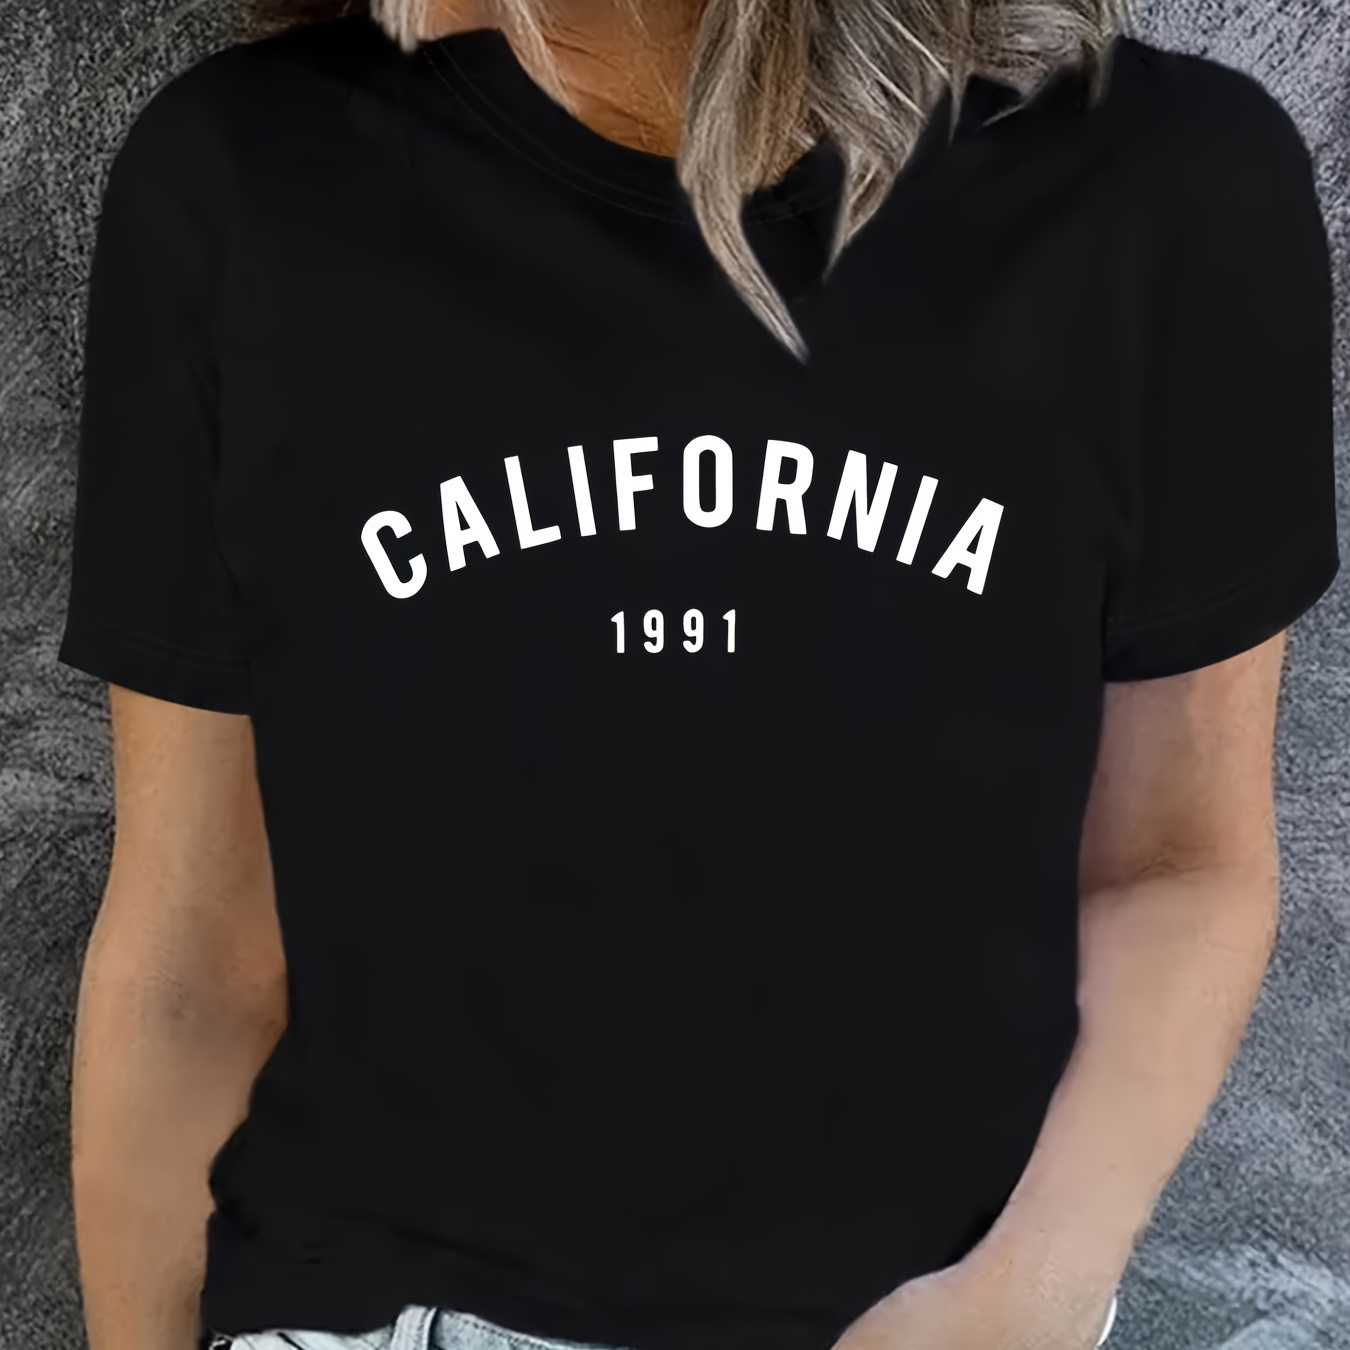 

California 1991 Letter Print T-shirt, Short Sleeve Crew Neck Casual Top For Summer & Spring, Women's Clothing